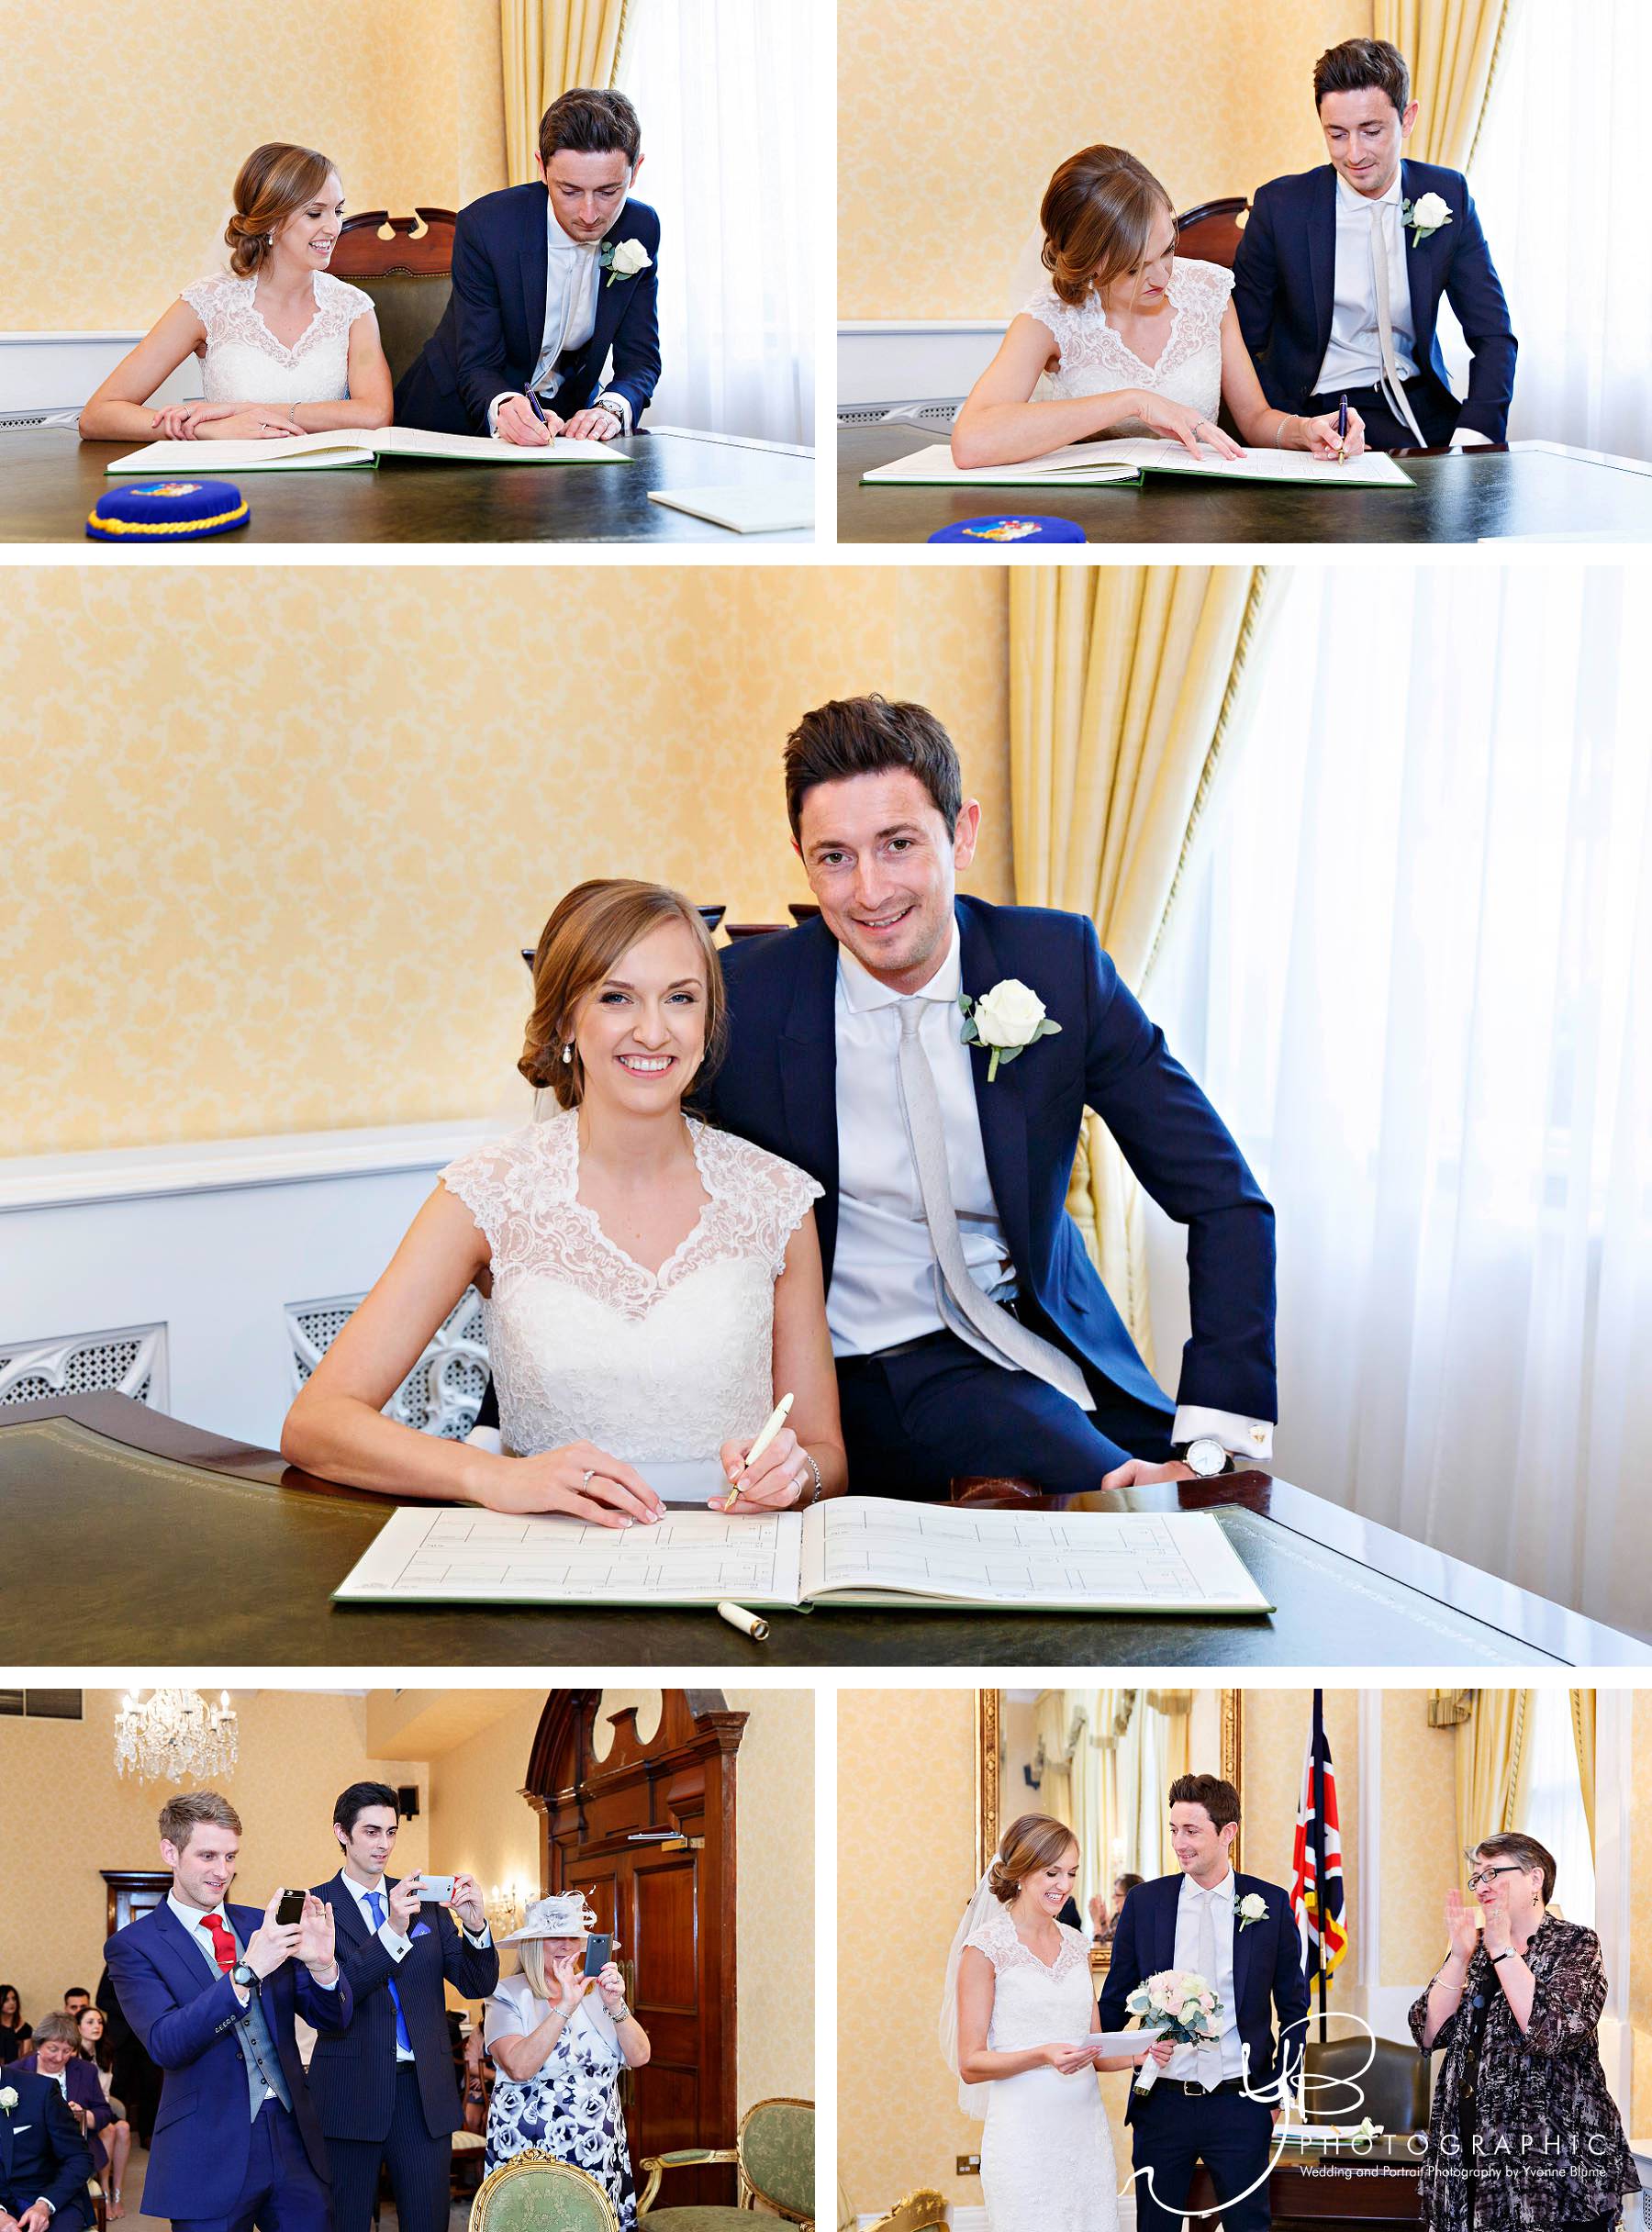 The bride and groom sign the register and receive their wedding certificate in the Brydon Room at Chelsea Register Office